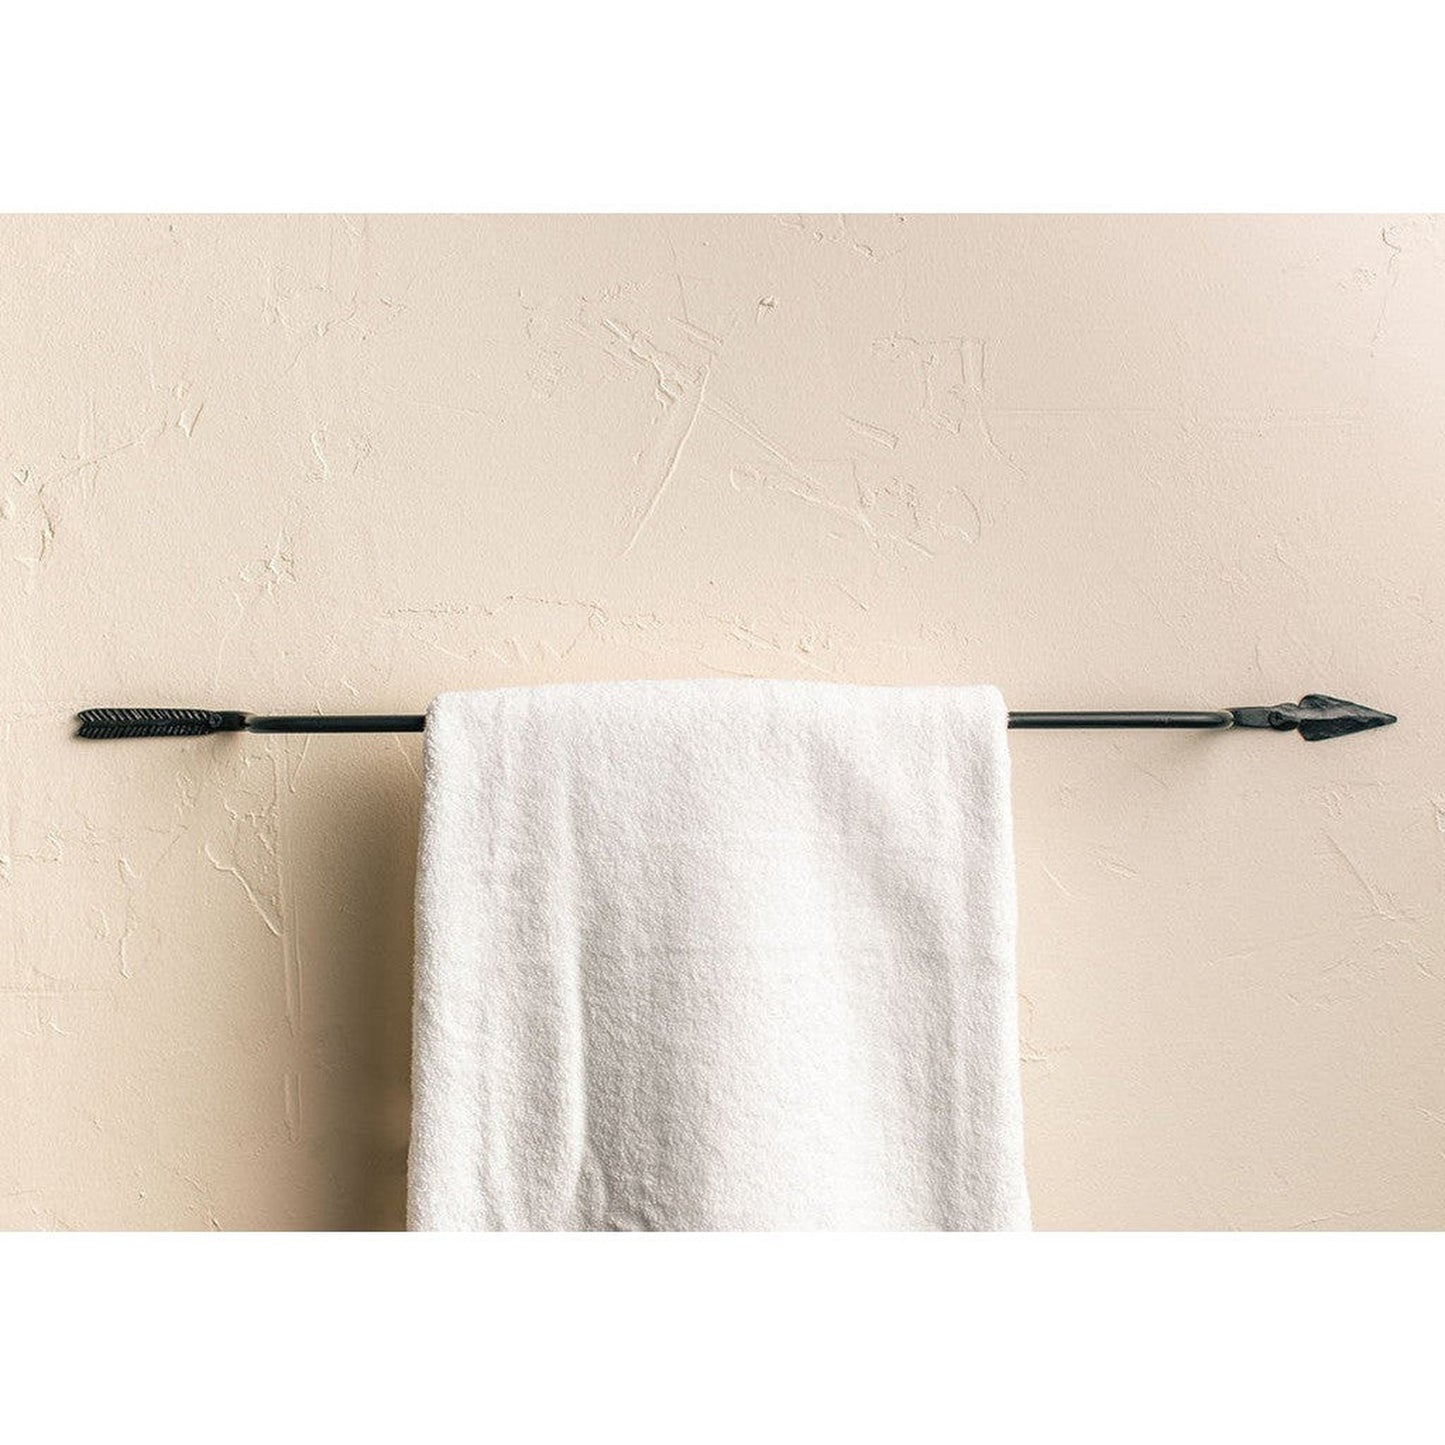 Stone County Ironworks Quapaw 24" Chalk White Iron Towel Bar With Copper Iron Accent